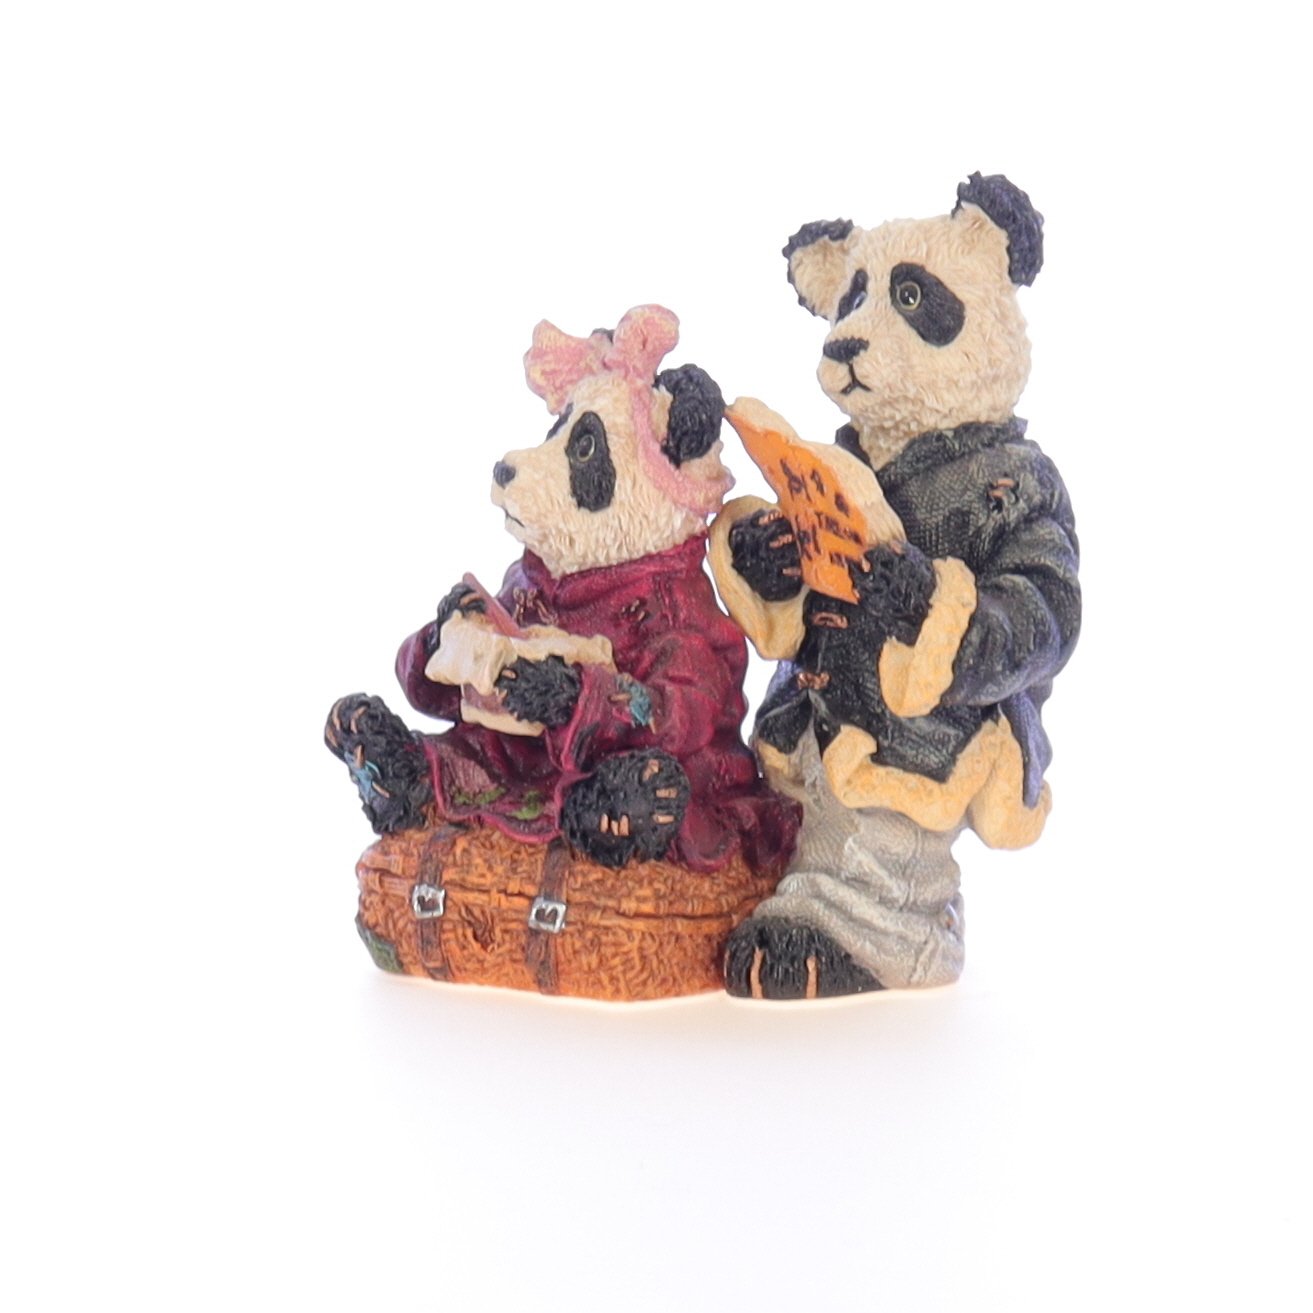 Boyds_Bears_Bearstone_Resin_Figurine_Hsing_Hsing_and_Ling_Ling_Wongbruin_Carryout_2433_02